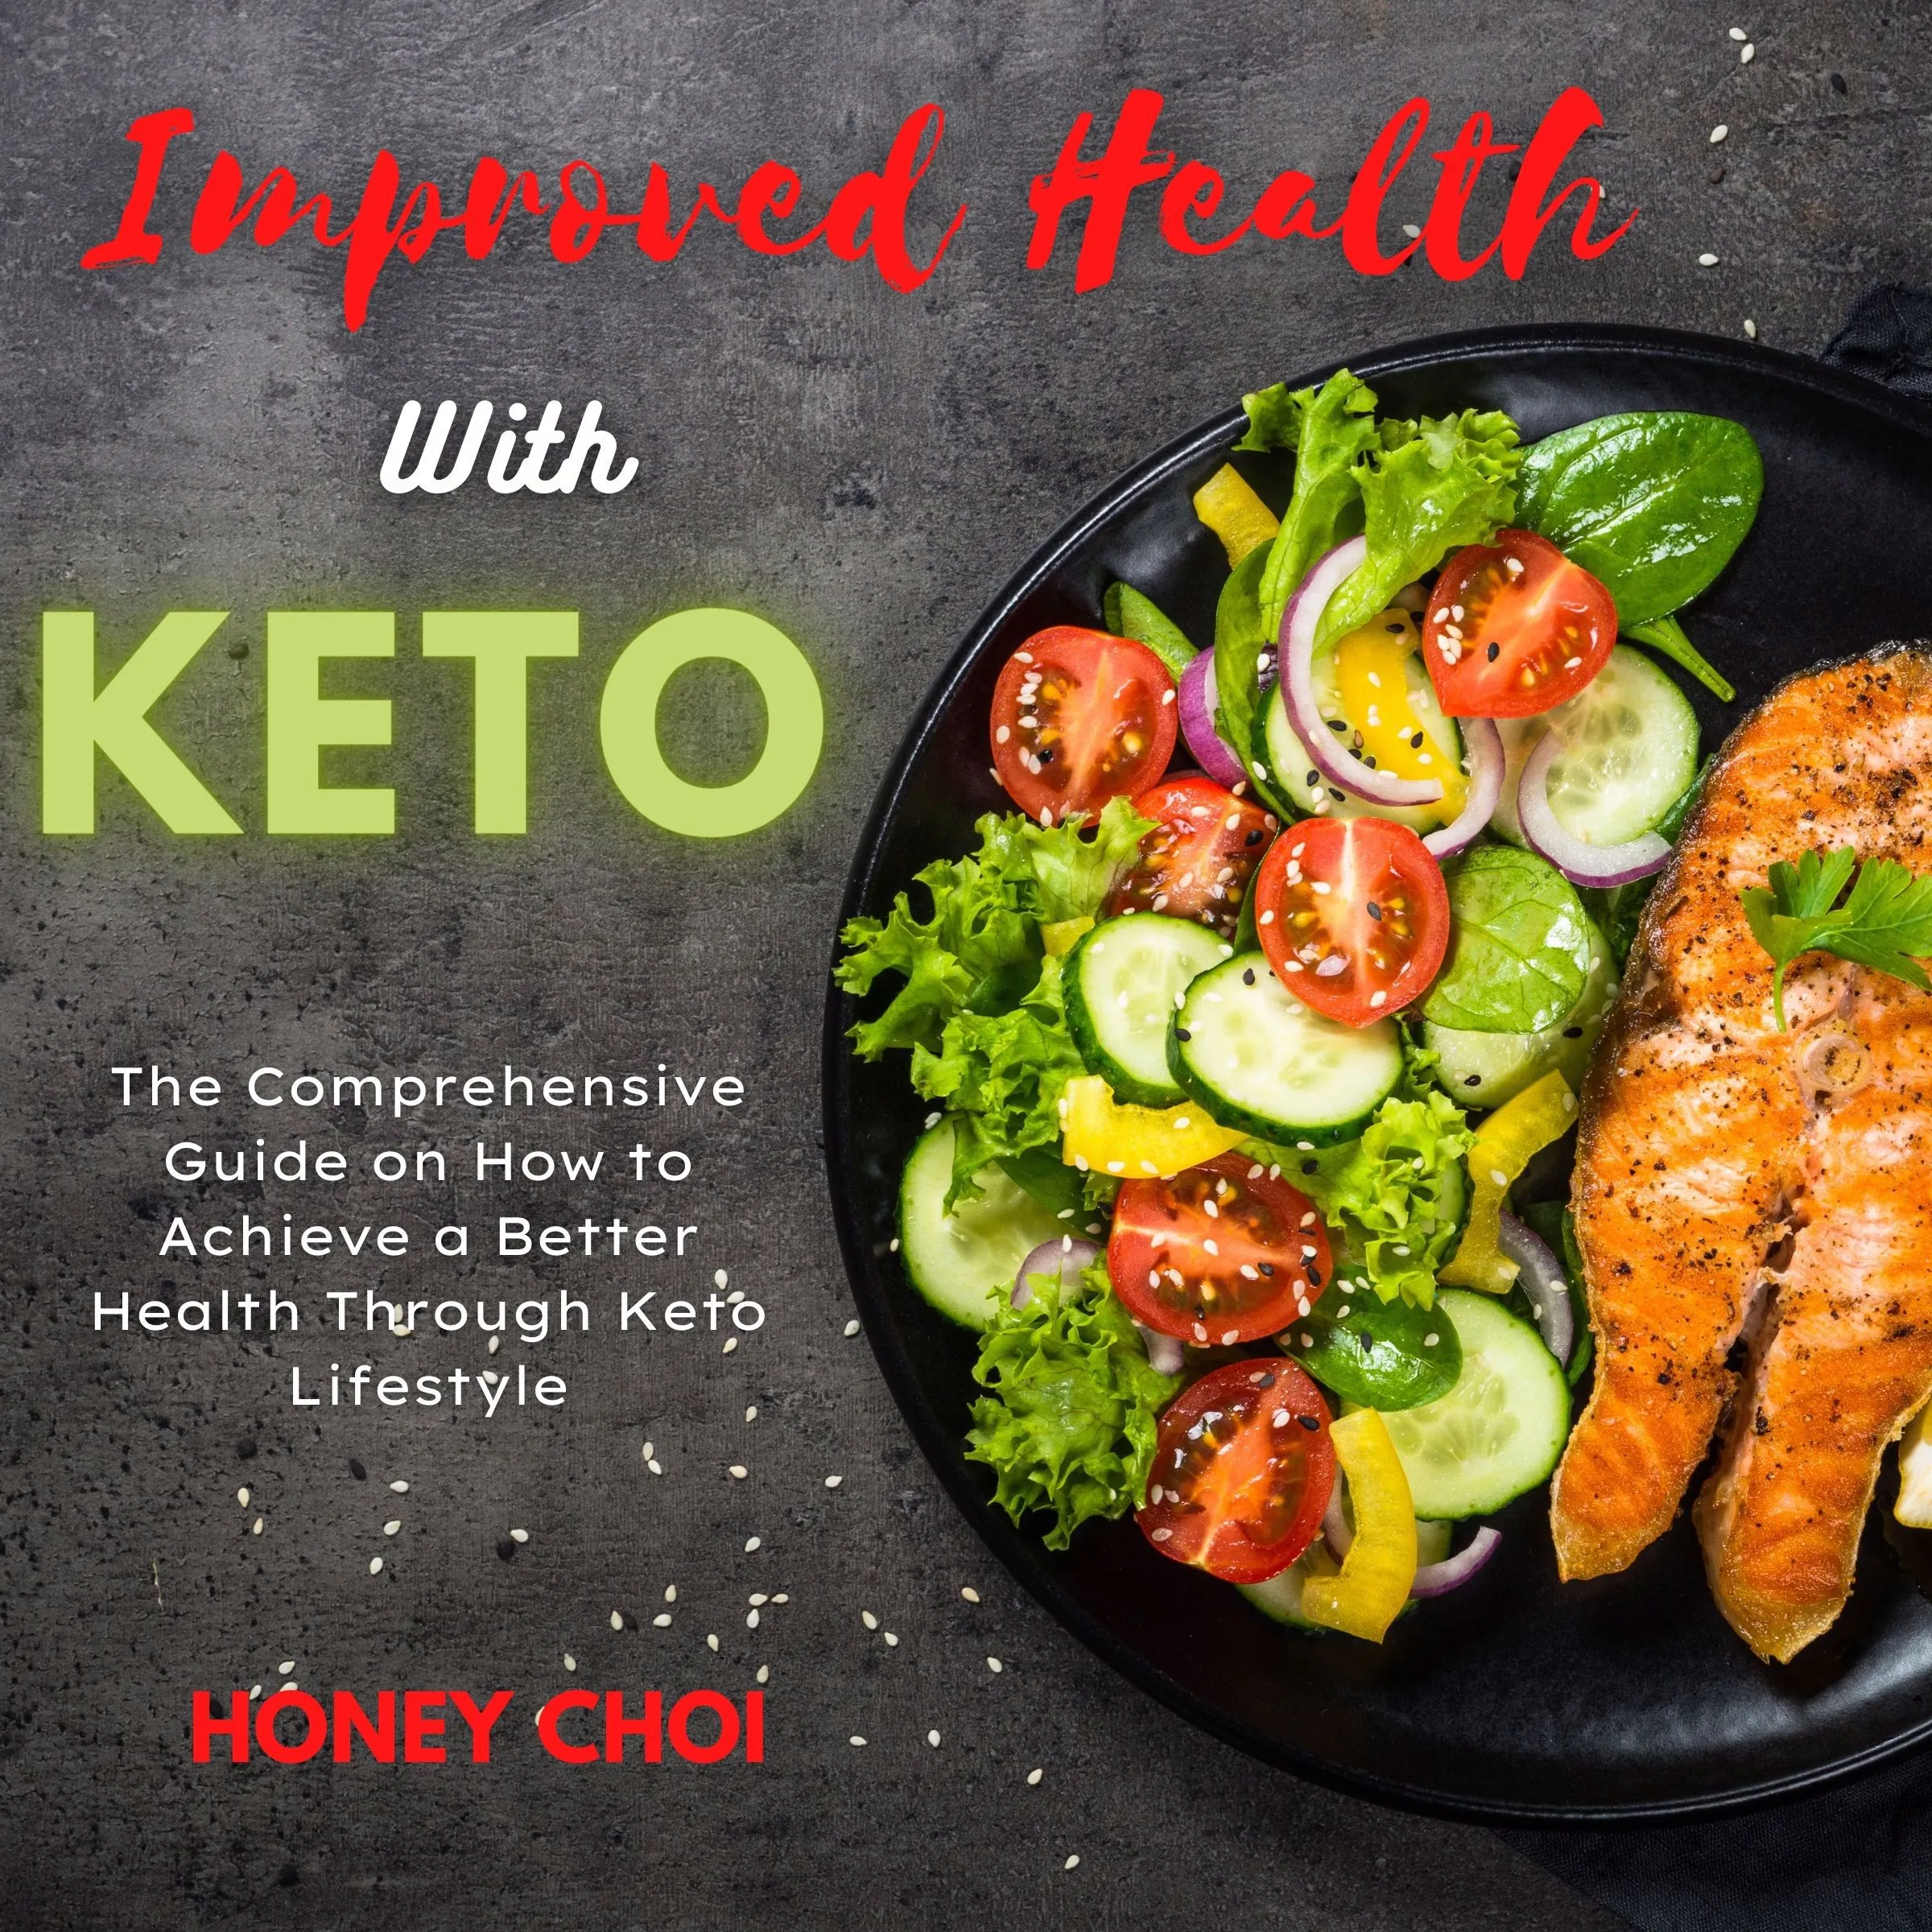 Improved Health with Keto Audiobook by Honey Choi